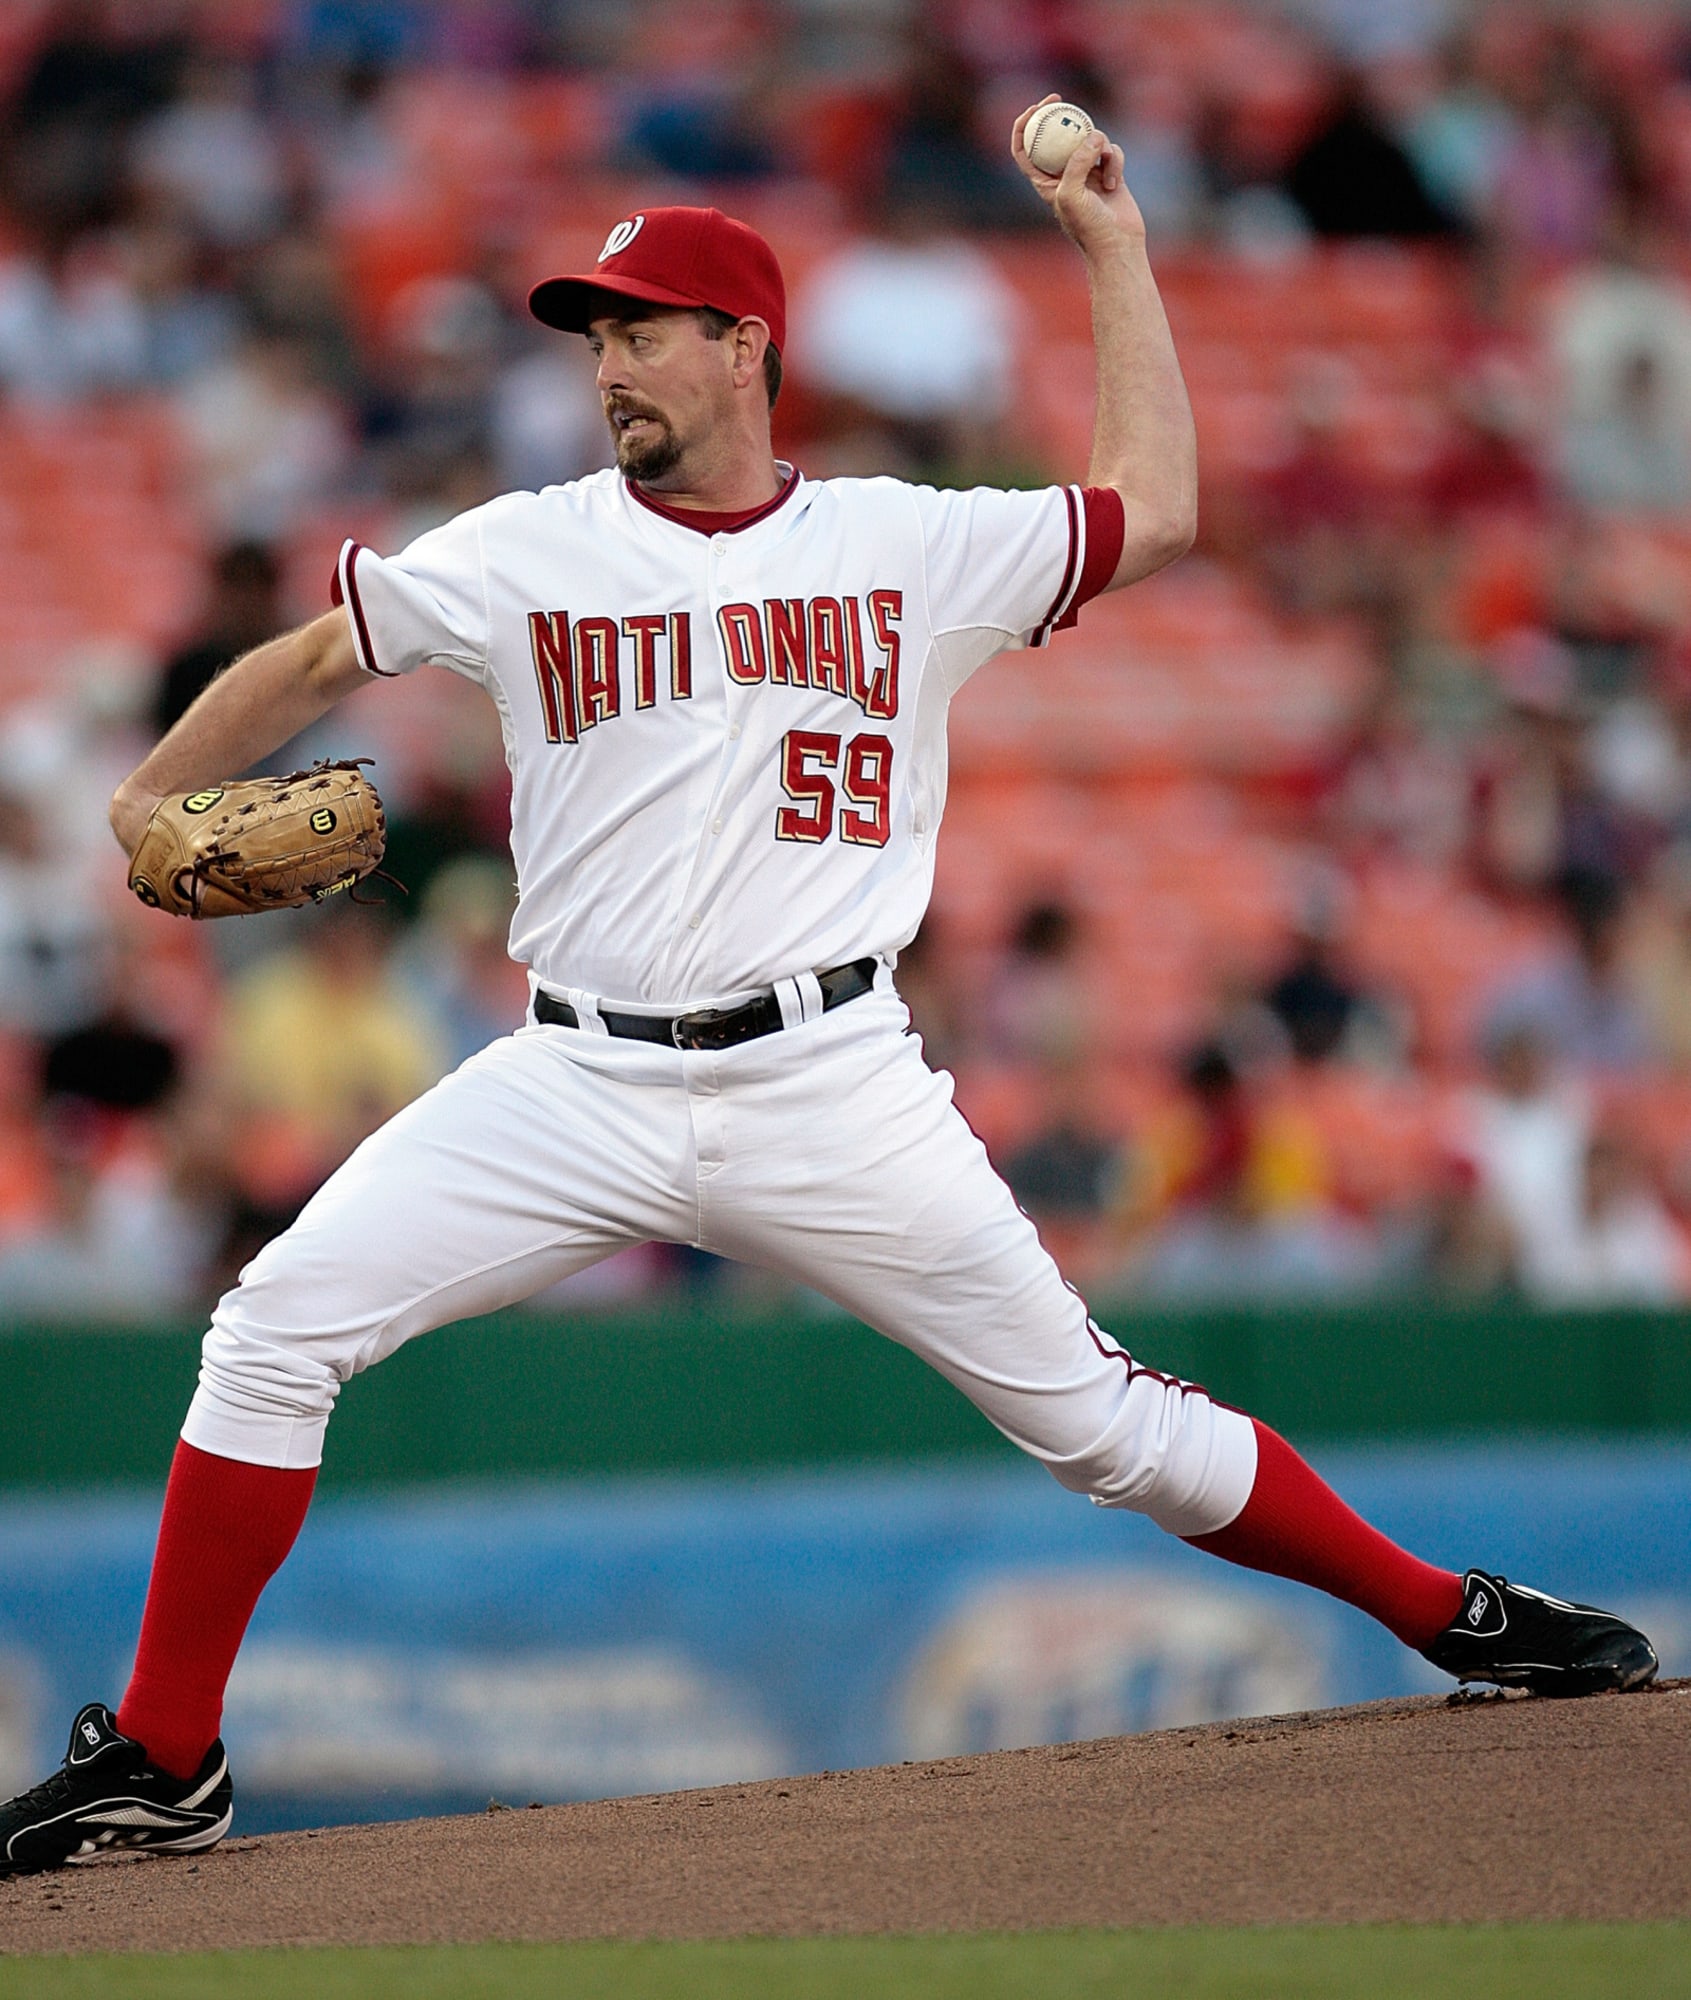 Washington Nationals: Former Pitcher Micah Bowie Fighting for His Life